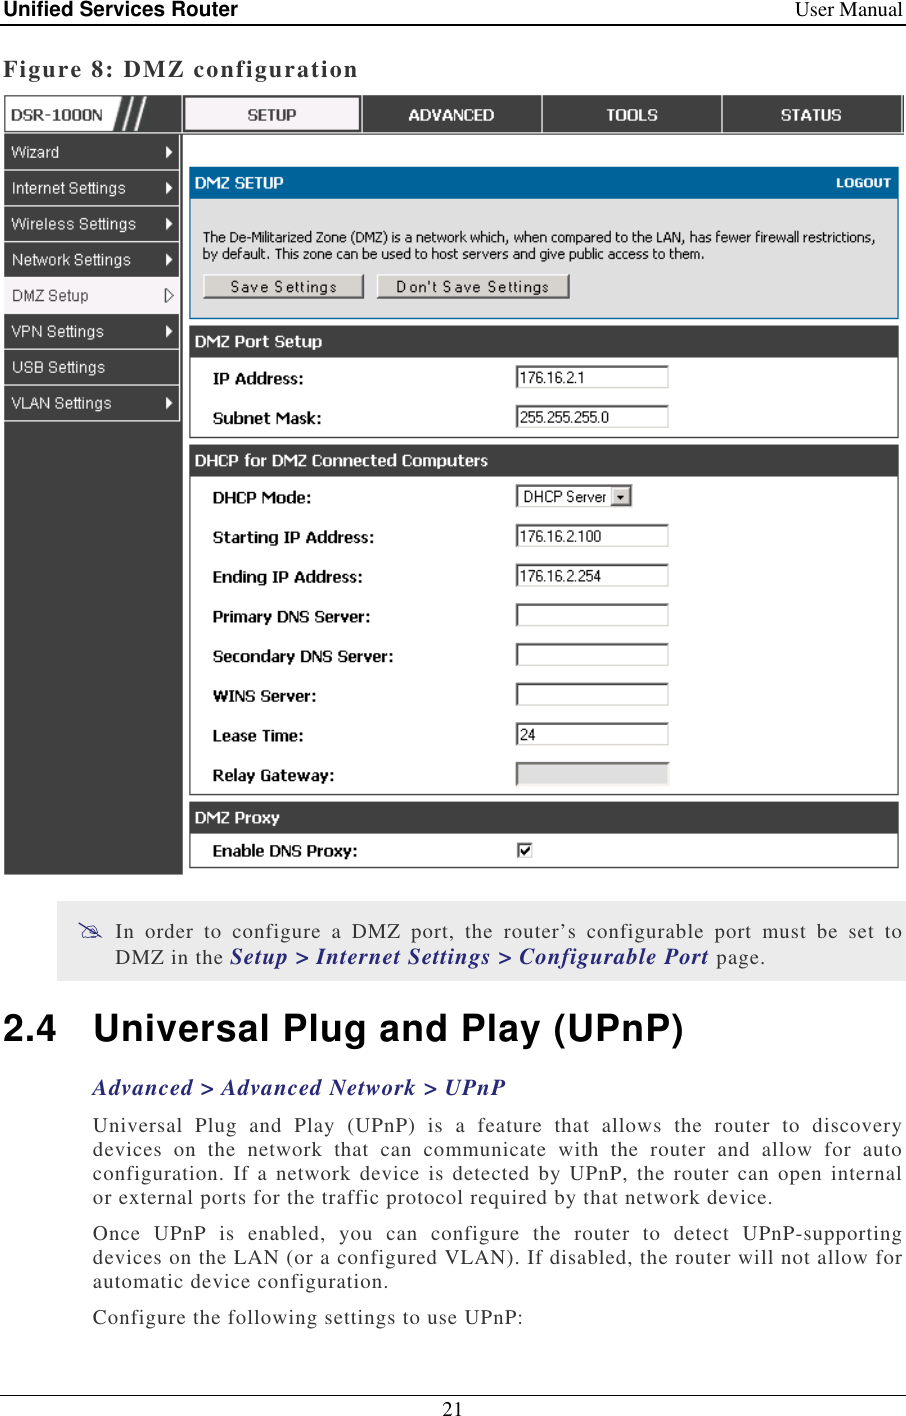 Unified Services Router    User Manual 21  Figure 8: DMZ configuration   In  order  to  configure  a  DMZ  port,  the  router’s  configurable  port  must  be  set  to DMZ in the Setup &gt; Internet Settings &gt; Configurable Port page.  2.4  Universal Plug and Play (UPnP) Advanced &gt; Advanced Network &gt; UPnP Universal  Plug  and  Play  (UPnP)  is  a  feature  that  allows  the  router  to  discovery devices  on  the  network  that  can  communicate  with  the  router  and  allow  for  auto configuration.  If  a network device is detected by  UPnP,  the router  can open  internal or external ports for the traffic protocol required by that network device.  Once  UPnP  is  enabled,  you  can  configure  the  router  to  detect  UPnP-supporting devices on the LAN (or a configured VLAN). If disabled, the router will not allow for automatic device configuration. Configure the following settings to use UPnP: 